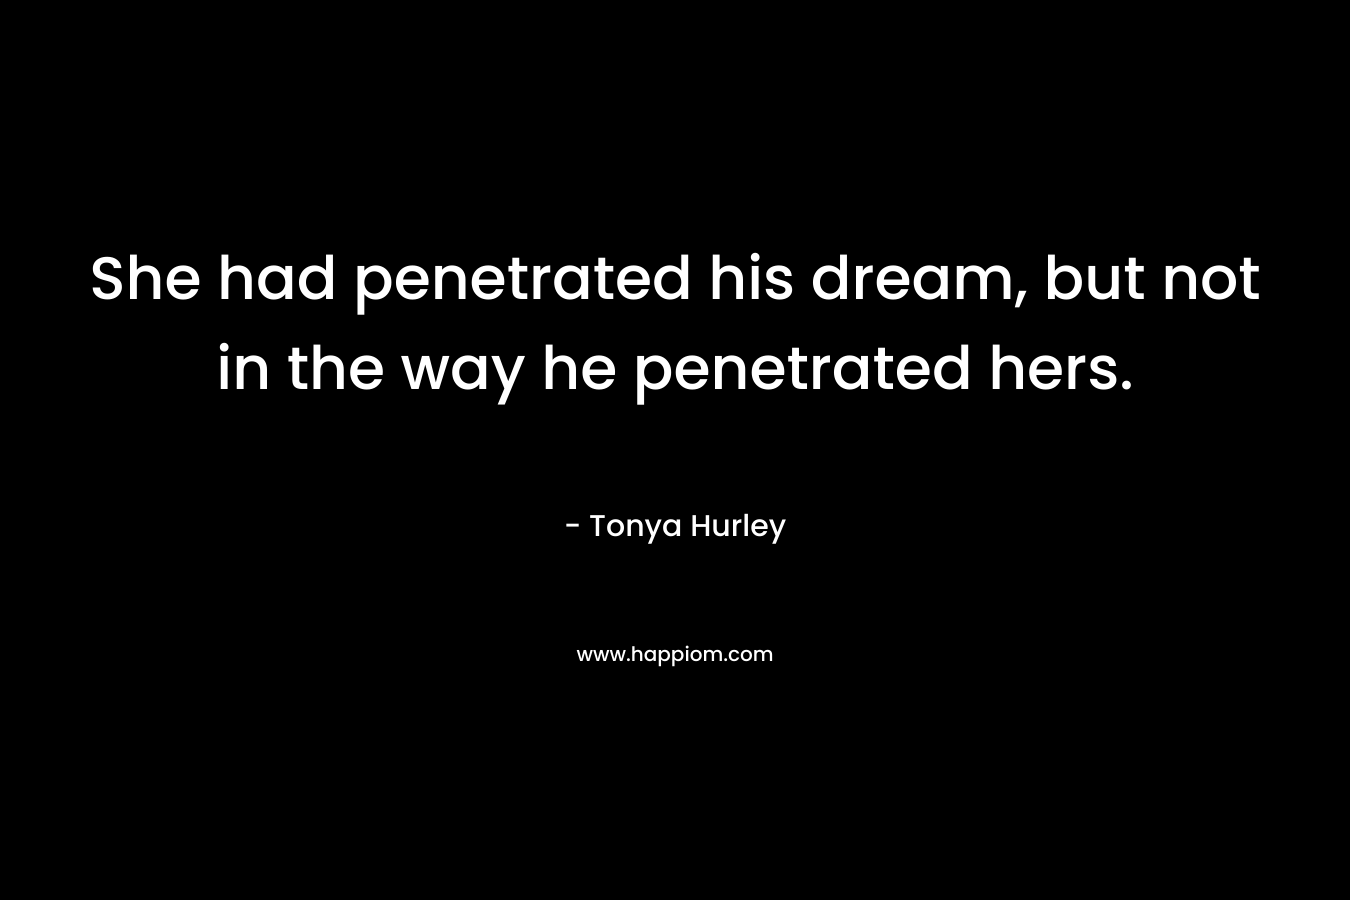 She had penetrated his dream, but not in the way he penetrated hers. – Tonya Hurley